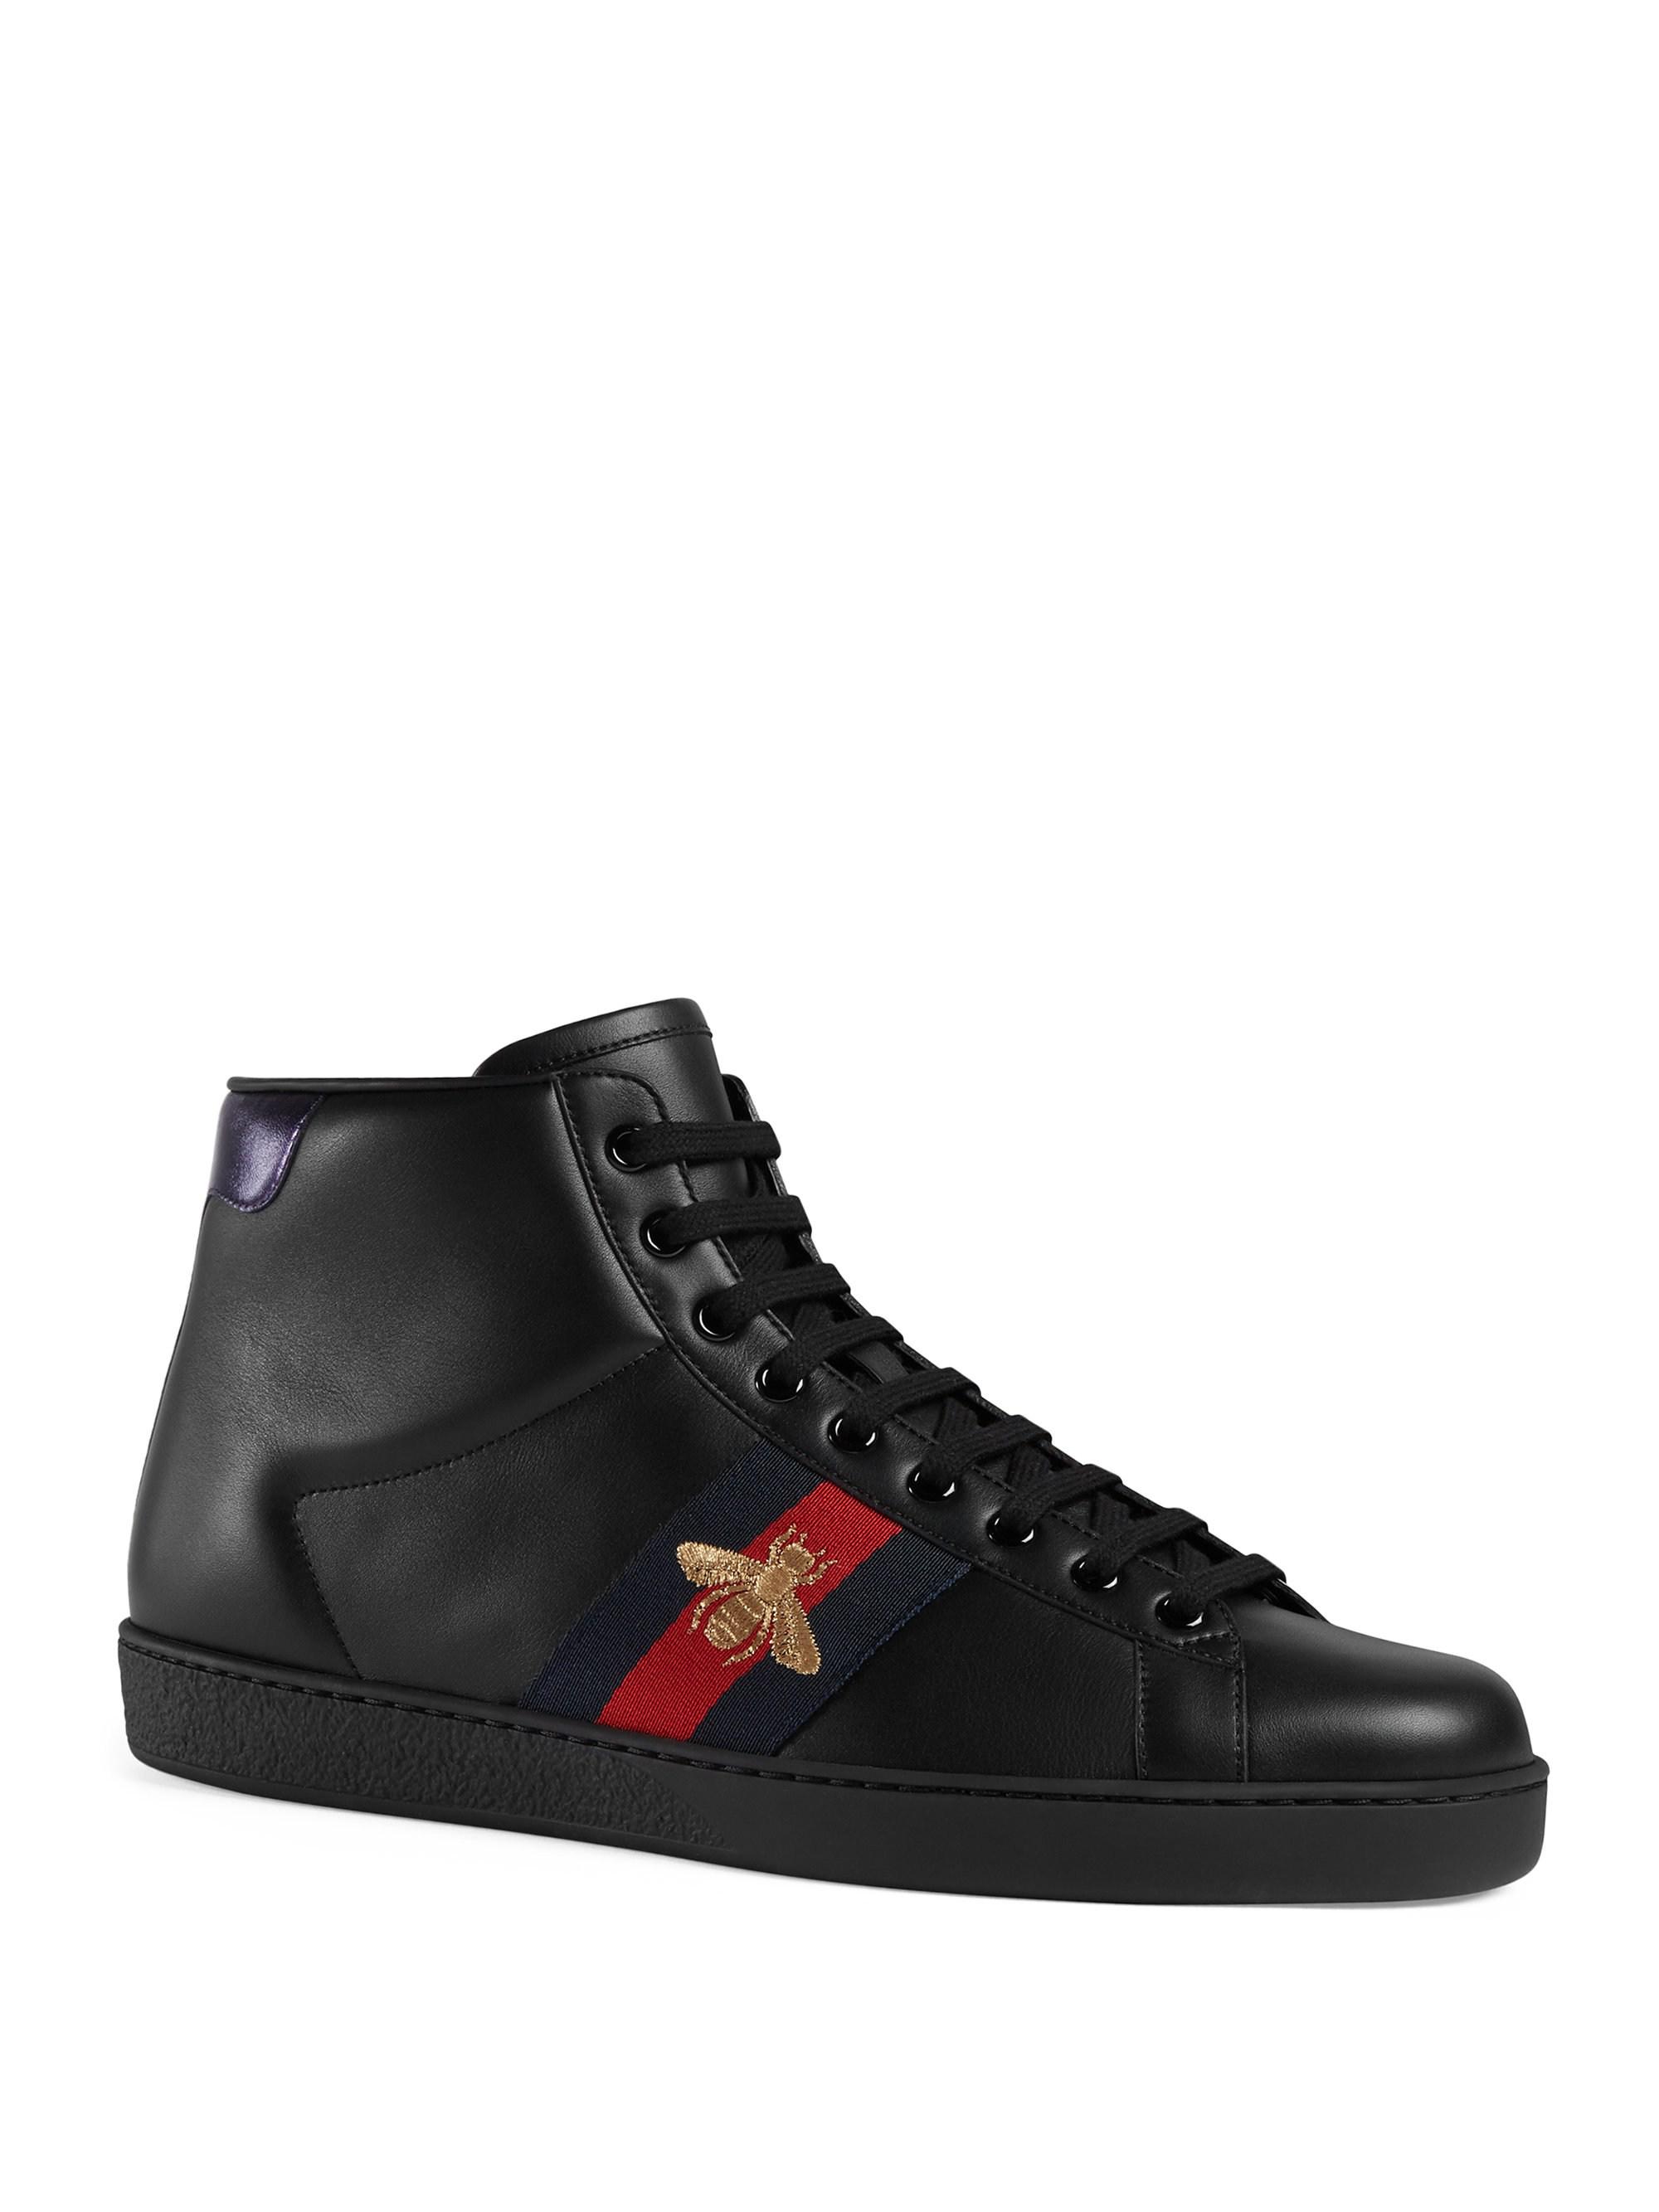 Gucci Leather New Ace High-top Sneakers in Black/Print (Black) for Men ...